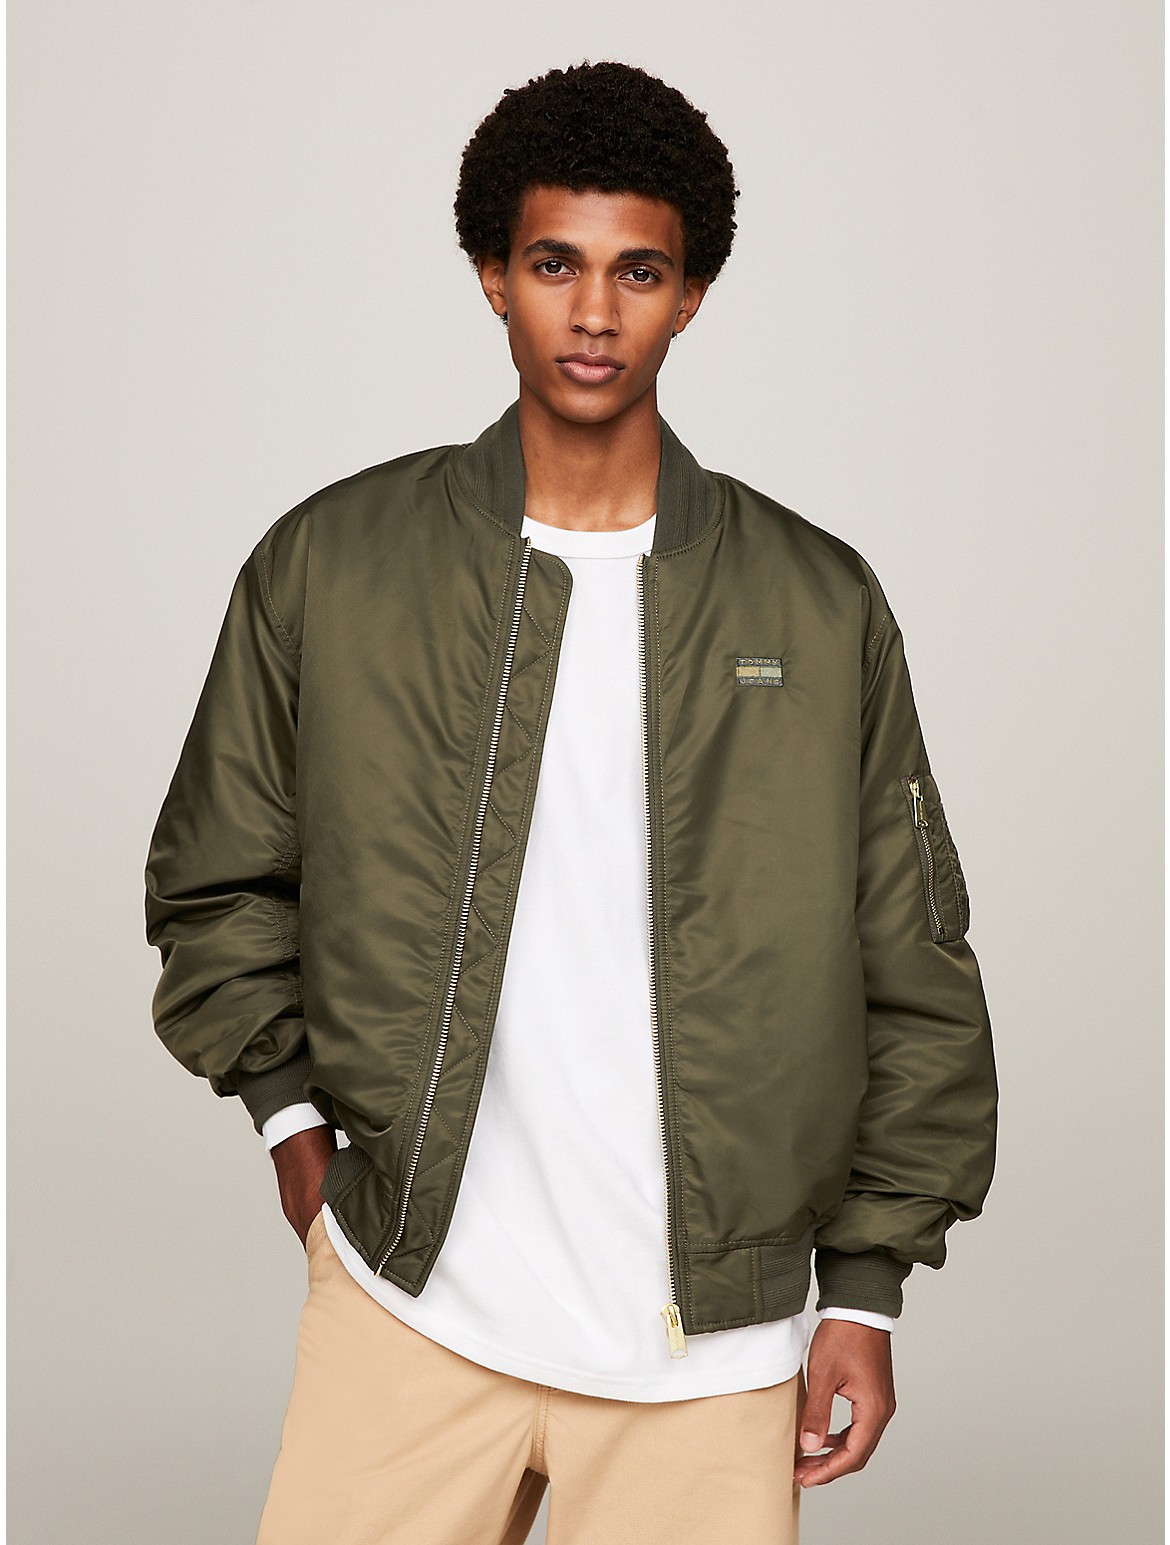 Tommy Hilfiger Men's Relaxed Fit Sateen Bomber Jacket